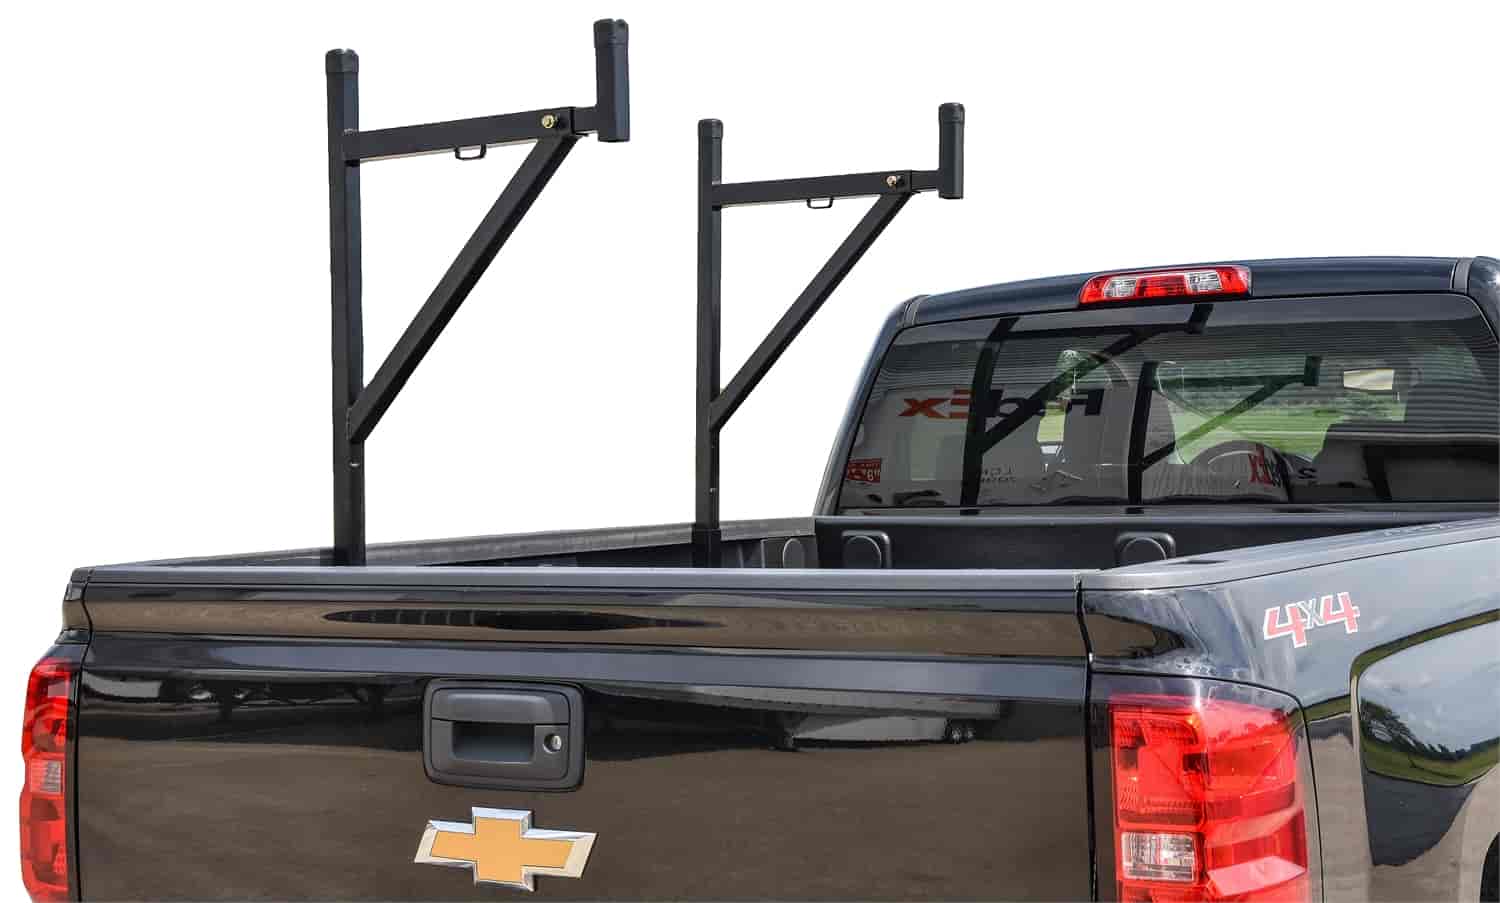 Heavy Duty Truck Ladder Rack Arms Adjust from